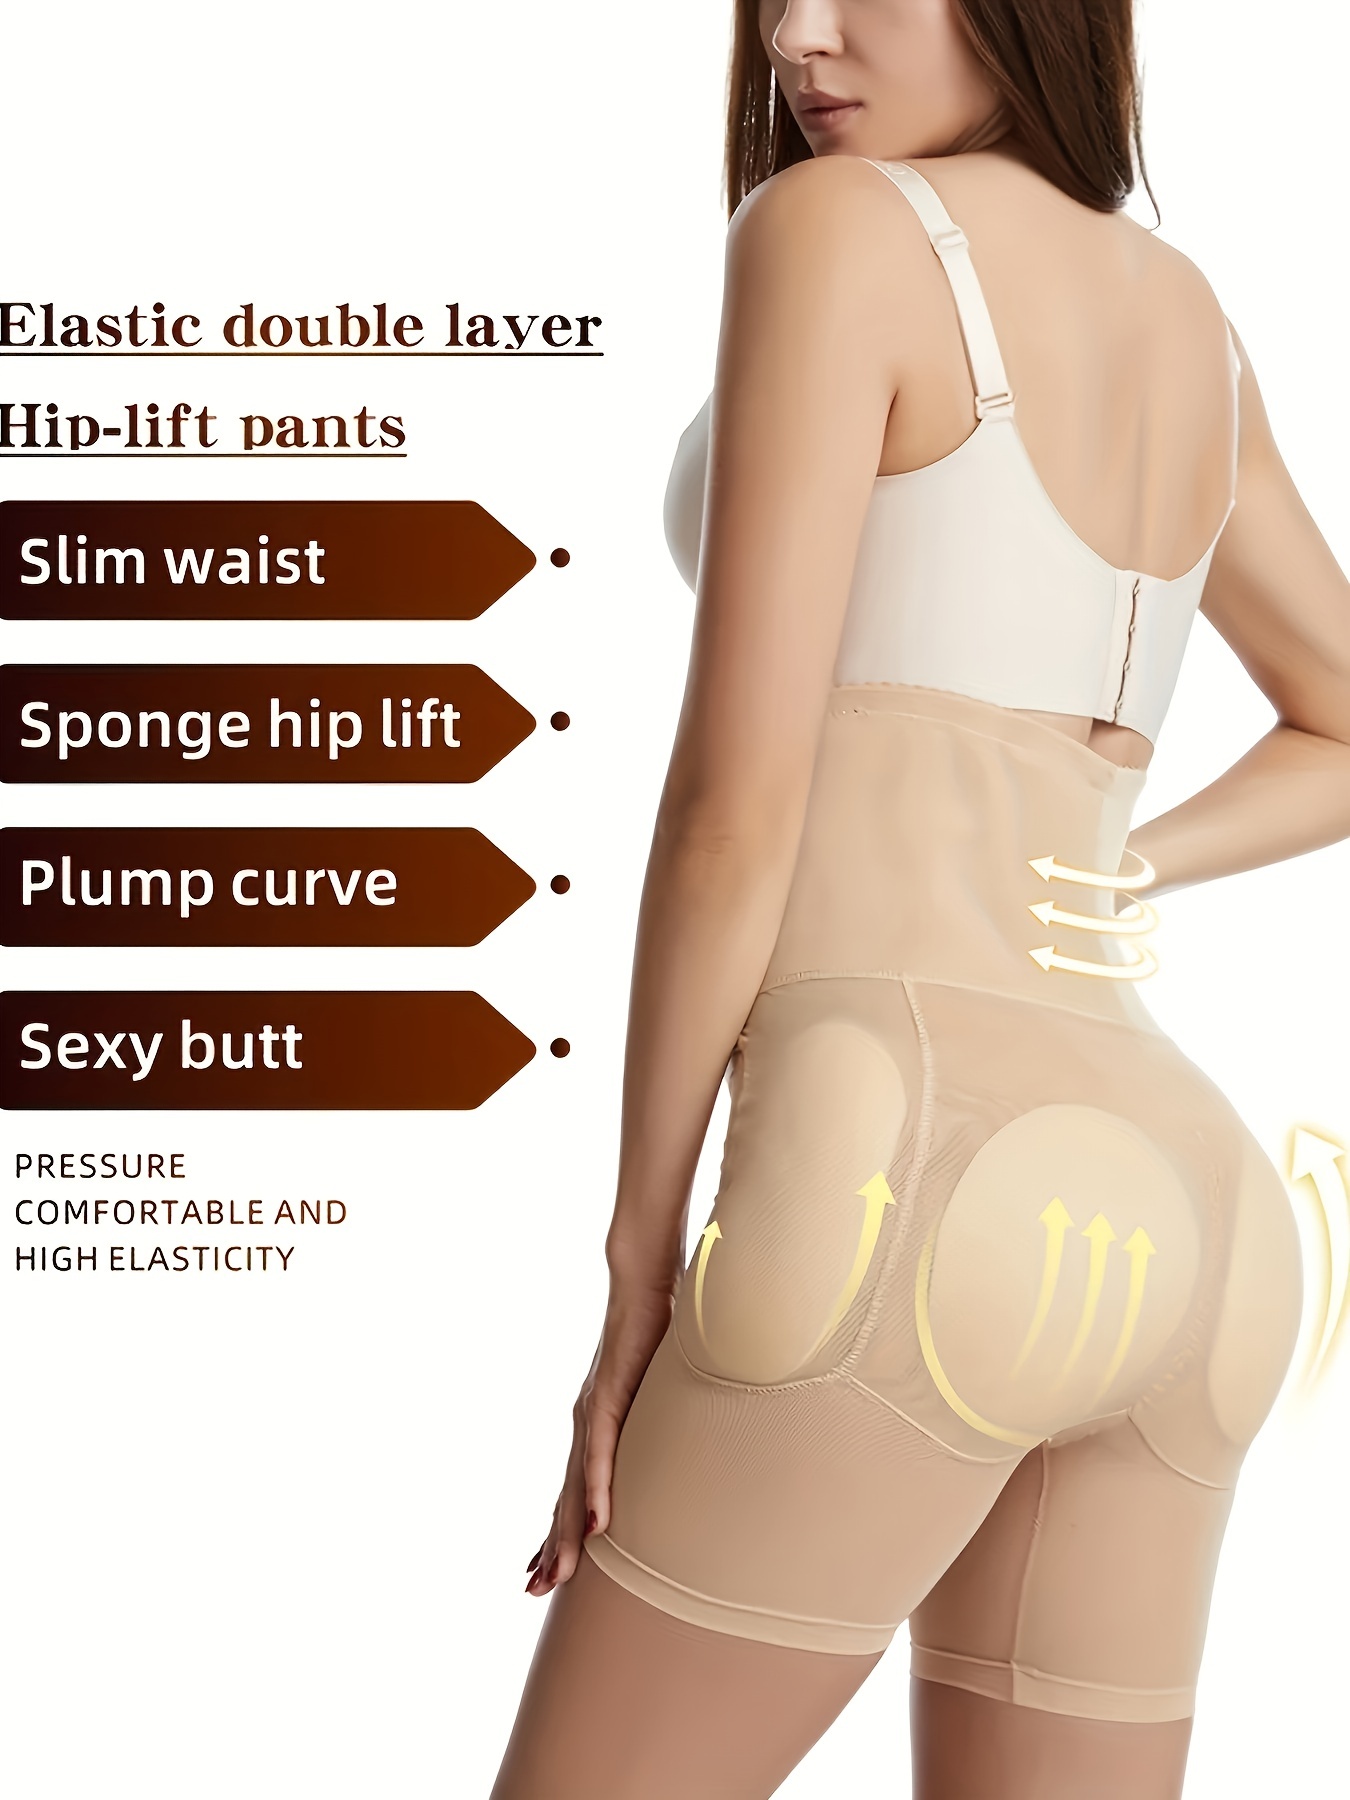 Scarboro Thigh Slimmers Shorts Skin friendly Thick Butt High